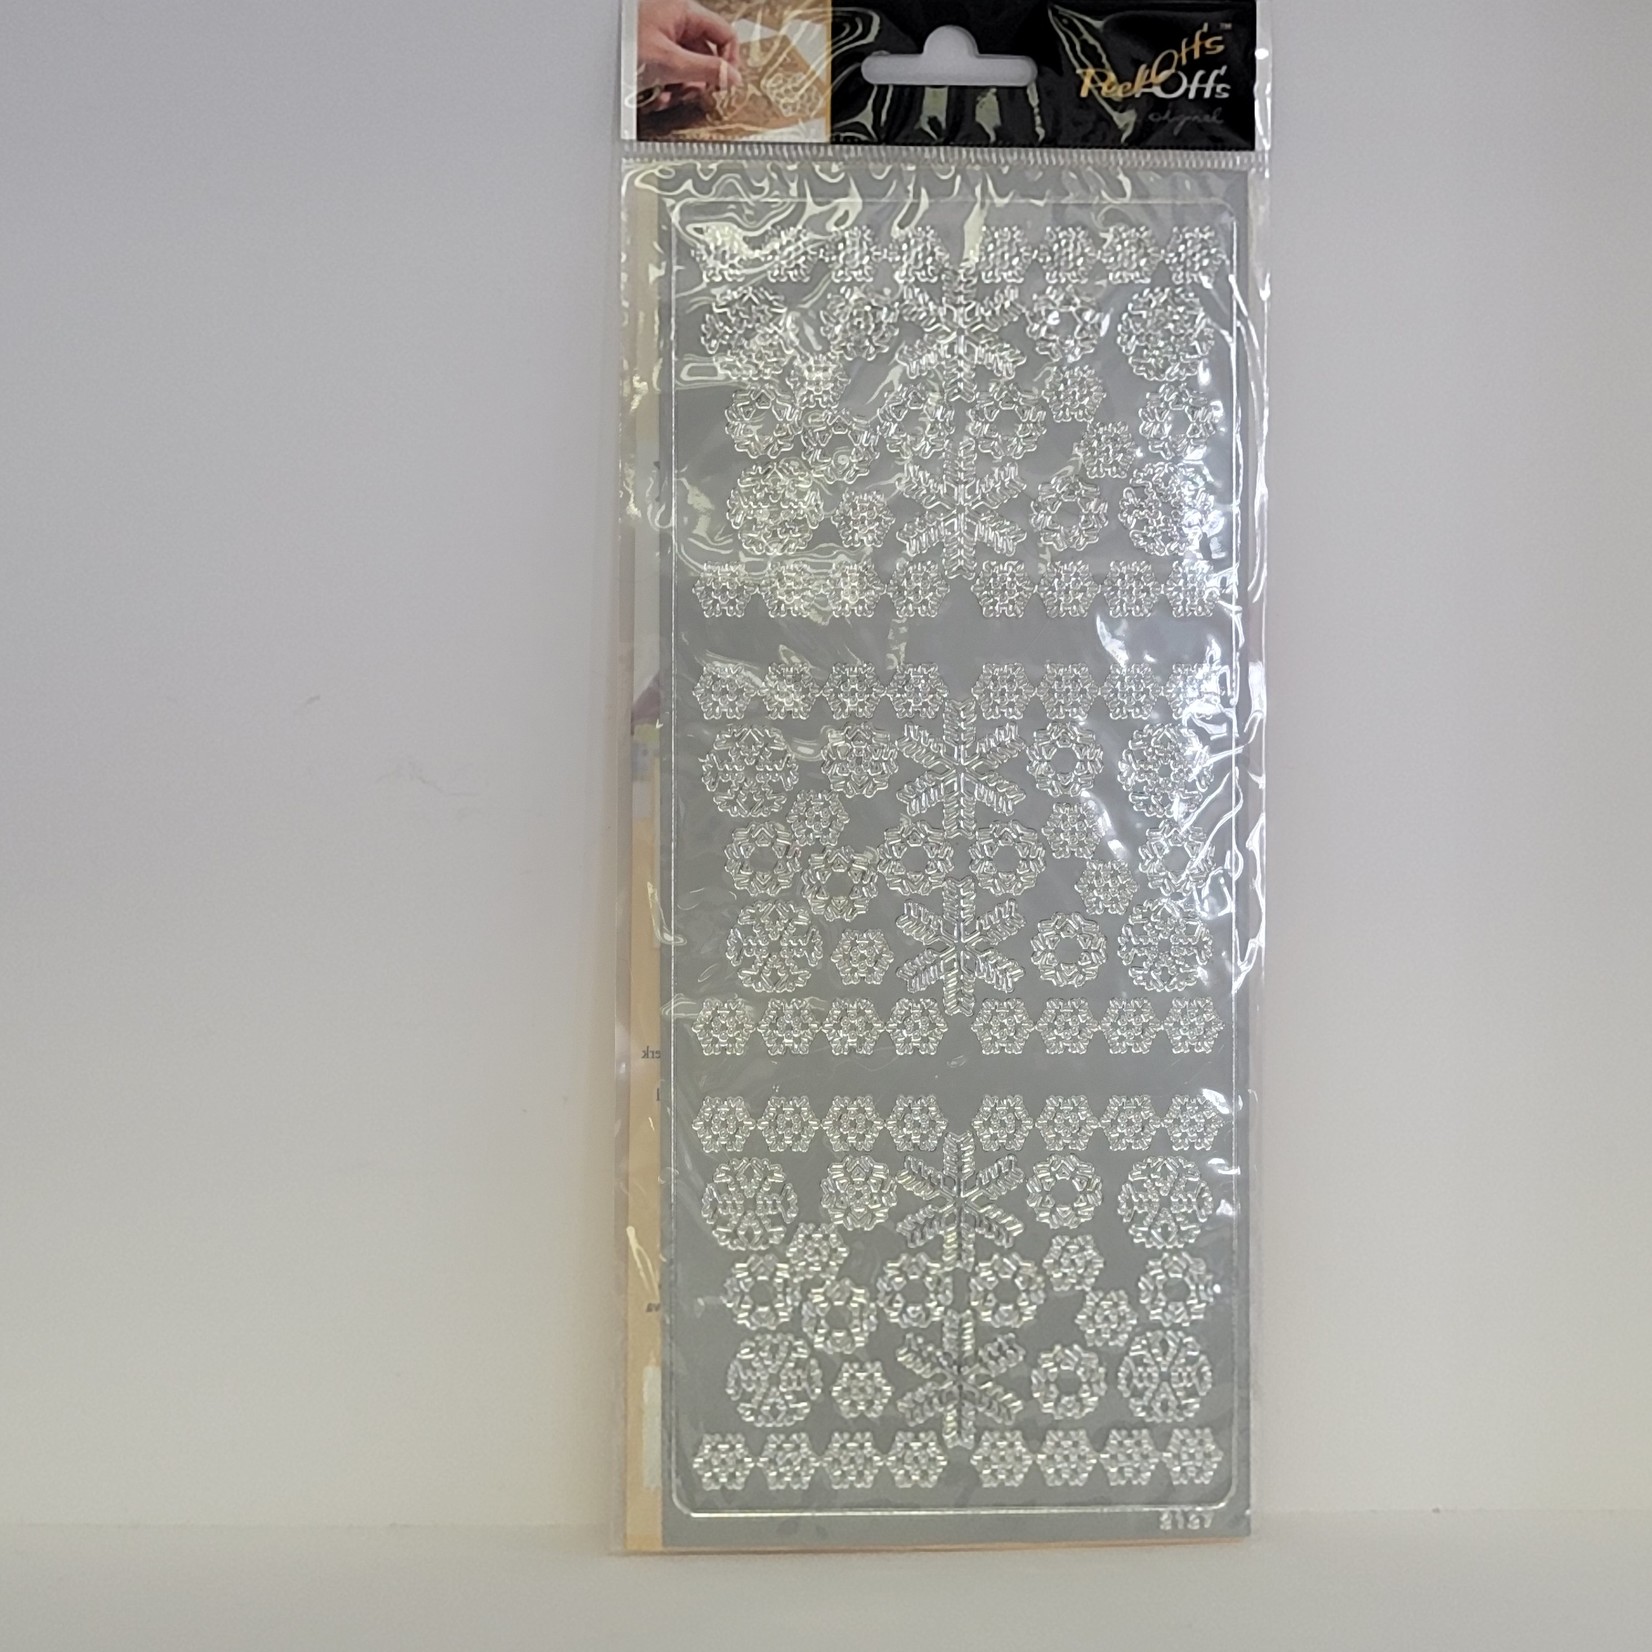 Stickers - Peel-Offs - Silver Snowflakes